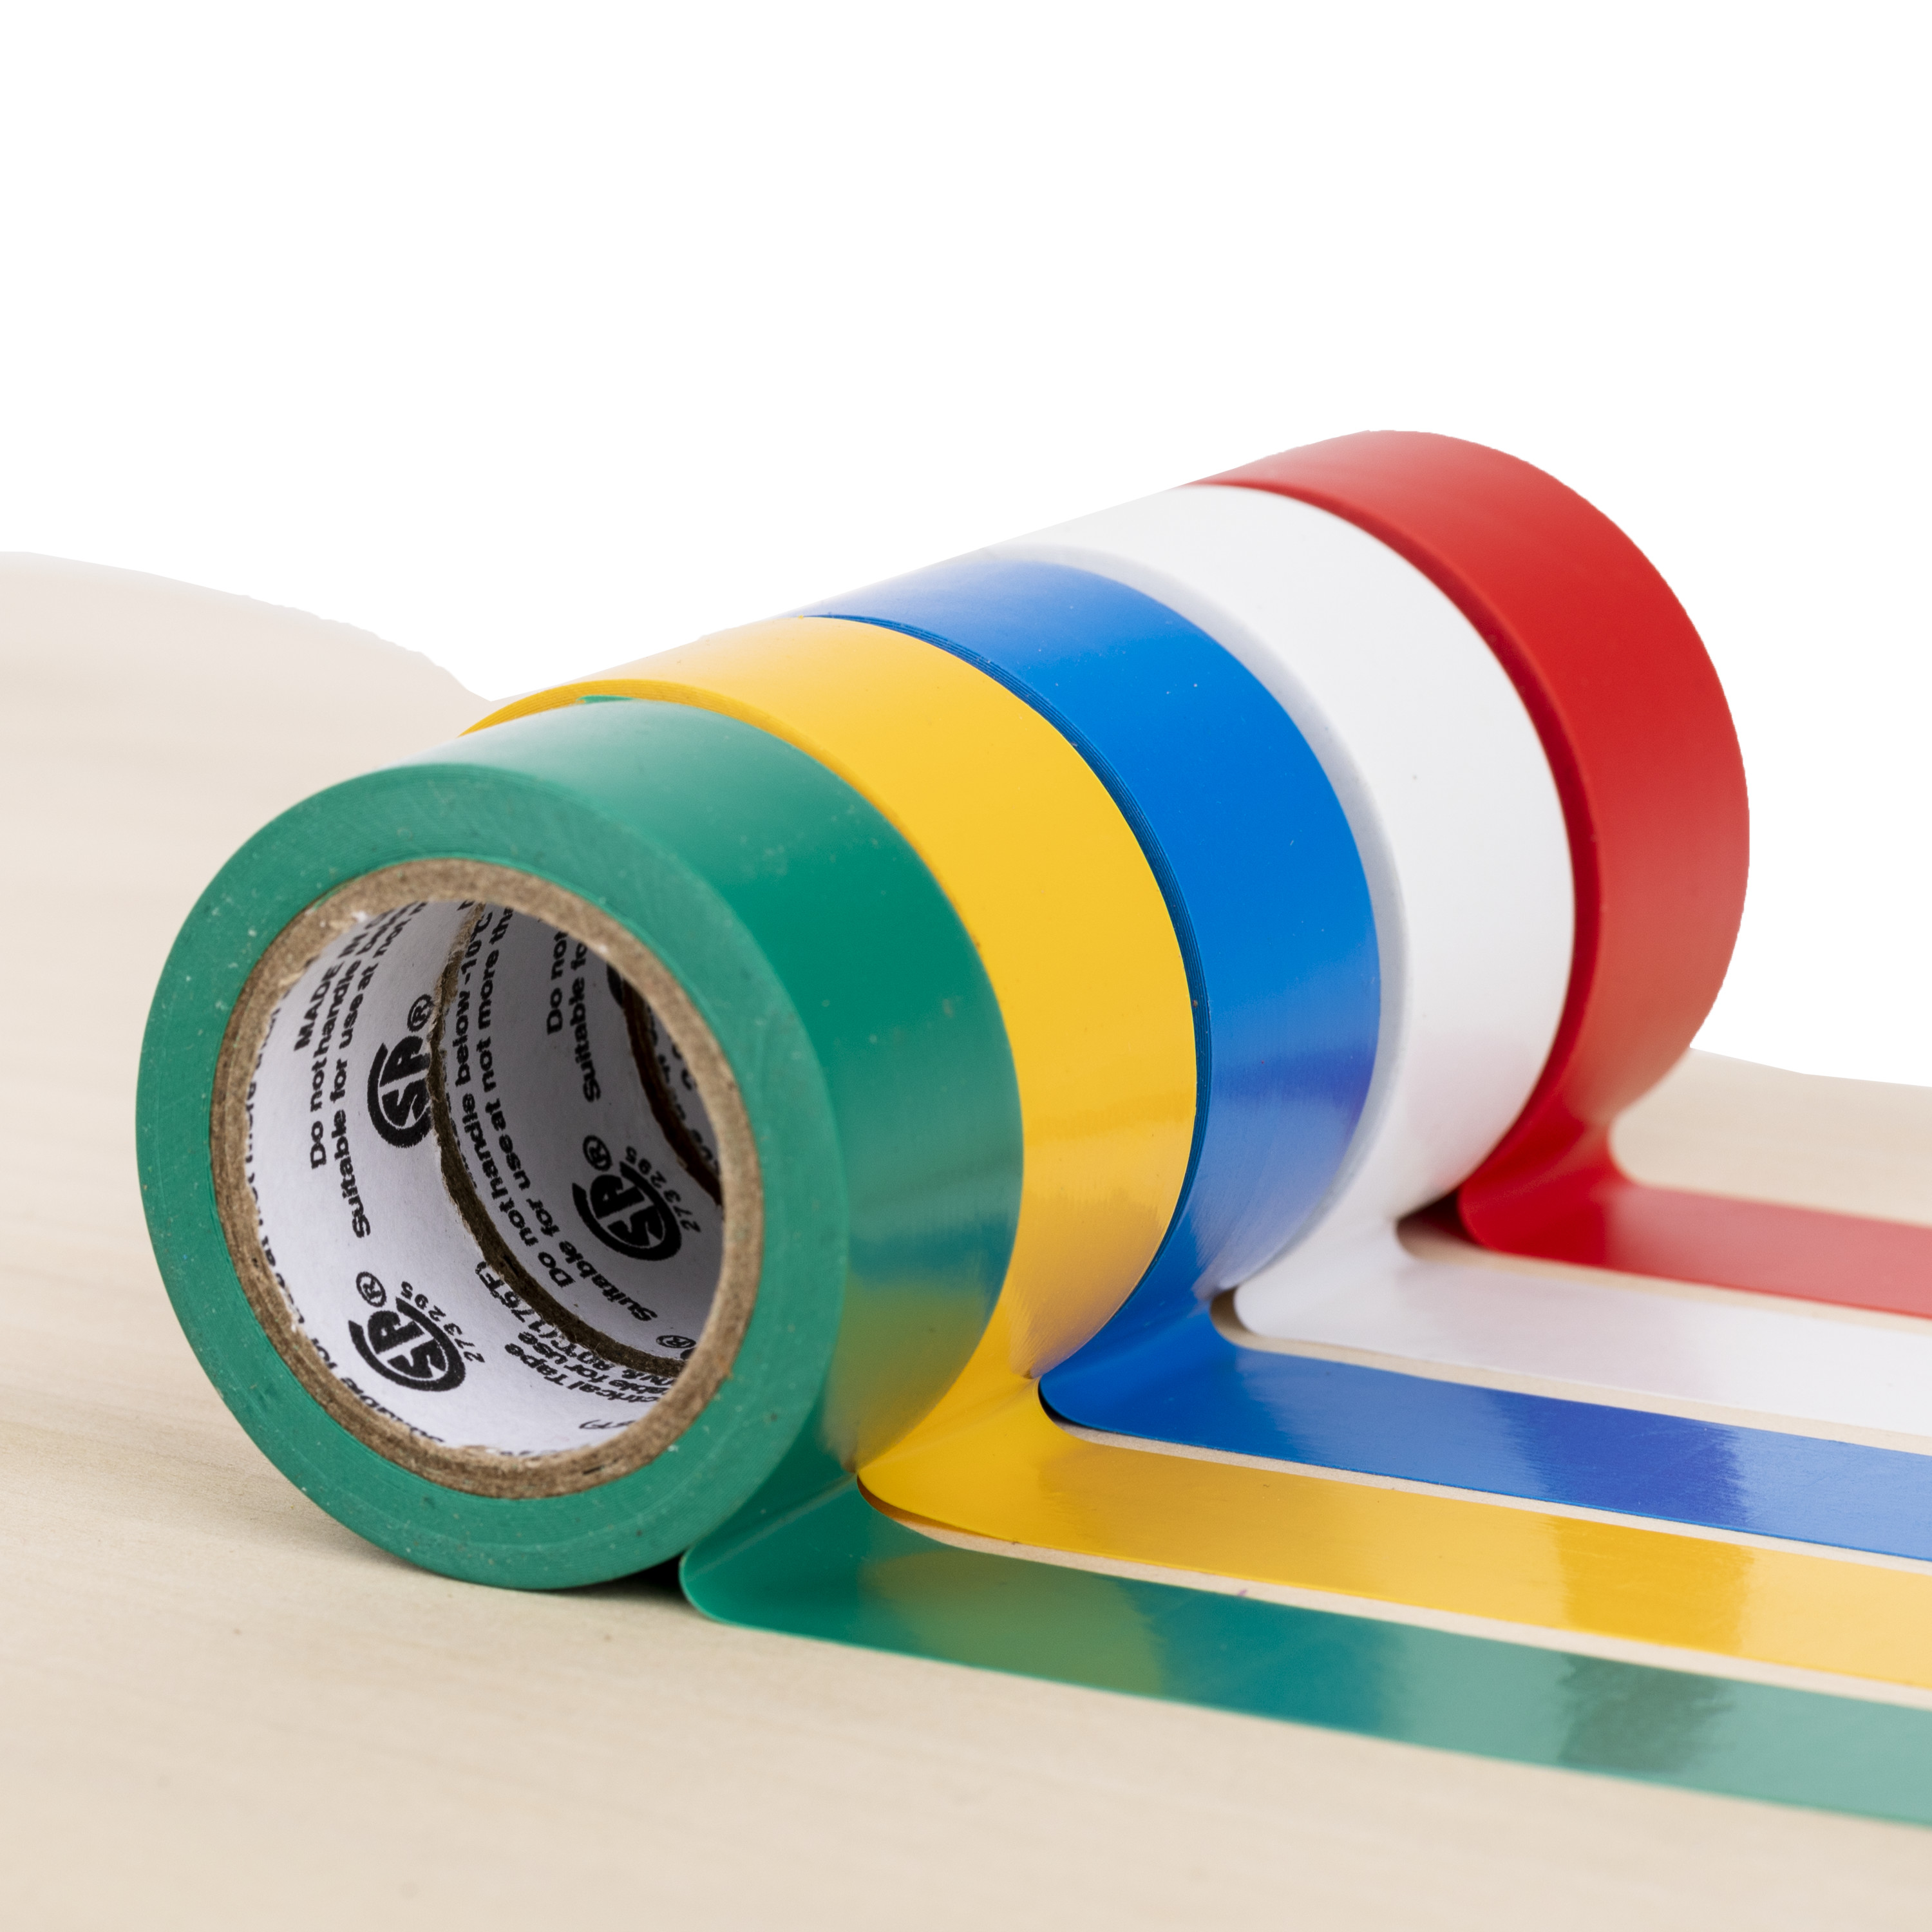 Duck Brand 0.75 in. x 12 ft. x 7 mm, Auto Electrical Tape, Assorted, 5 Pack, Size: .75 Inches x 12 Feet x 7 Mil.